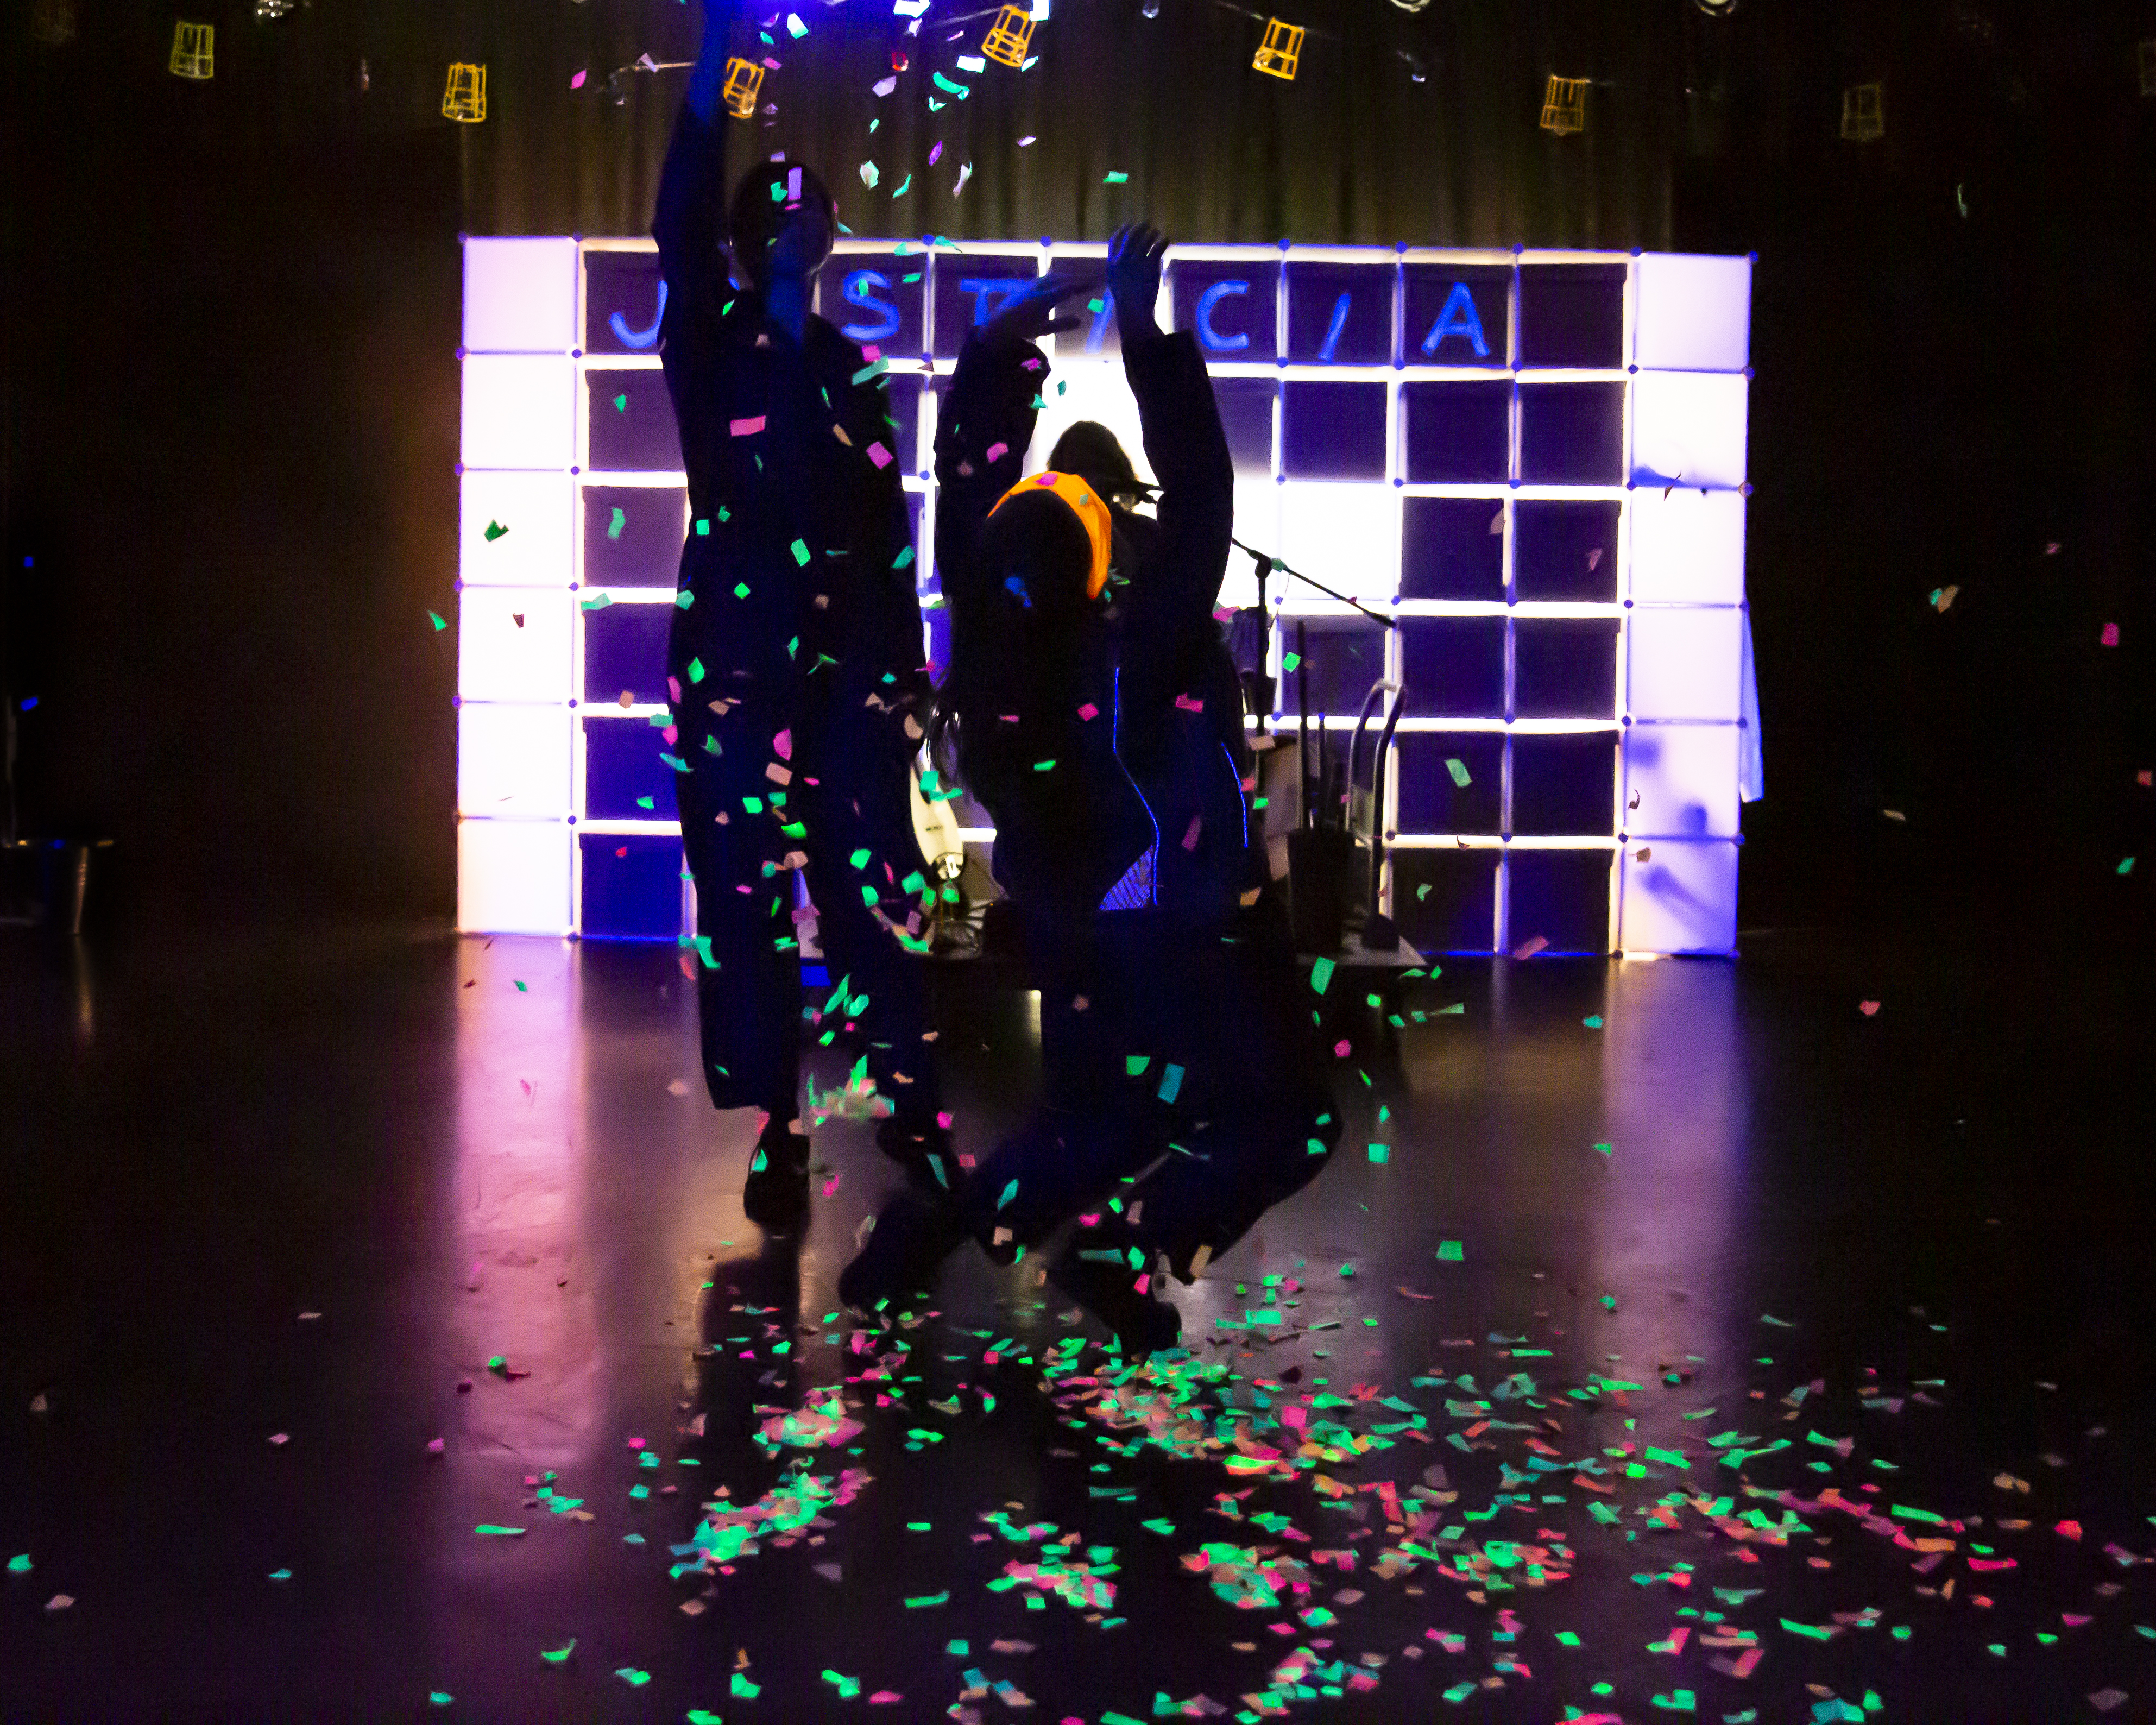 Two people jump amongst colourful confetti, with the word "justicia" visible on the wall behind them